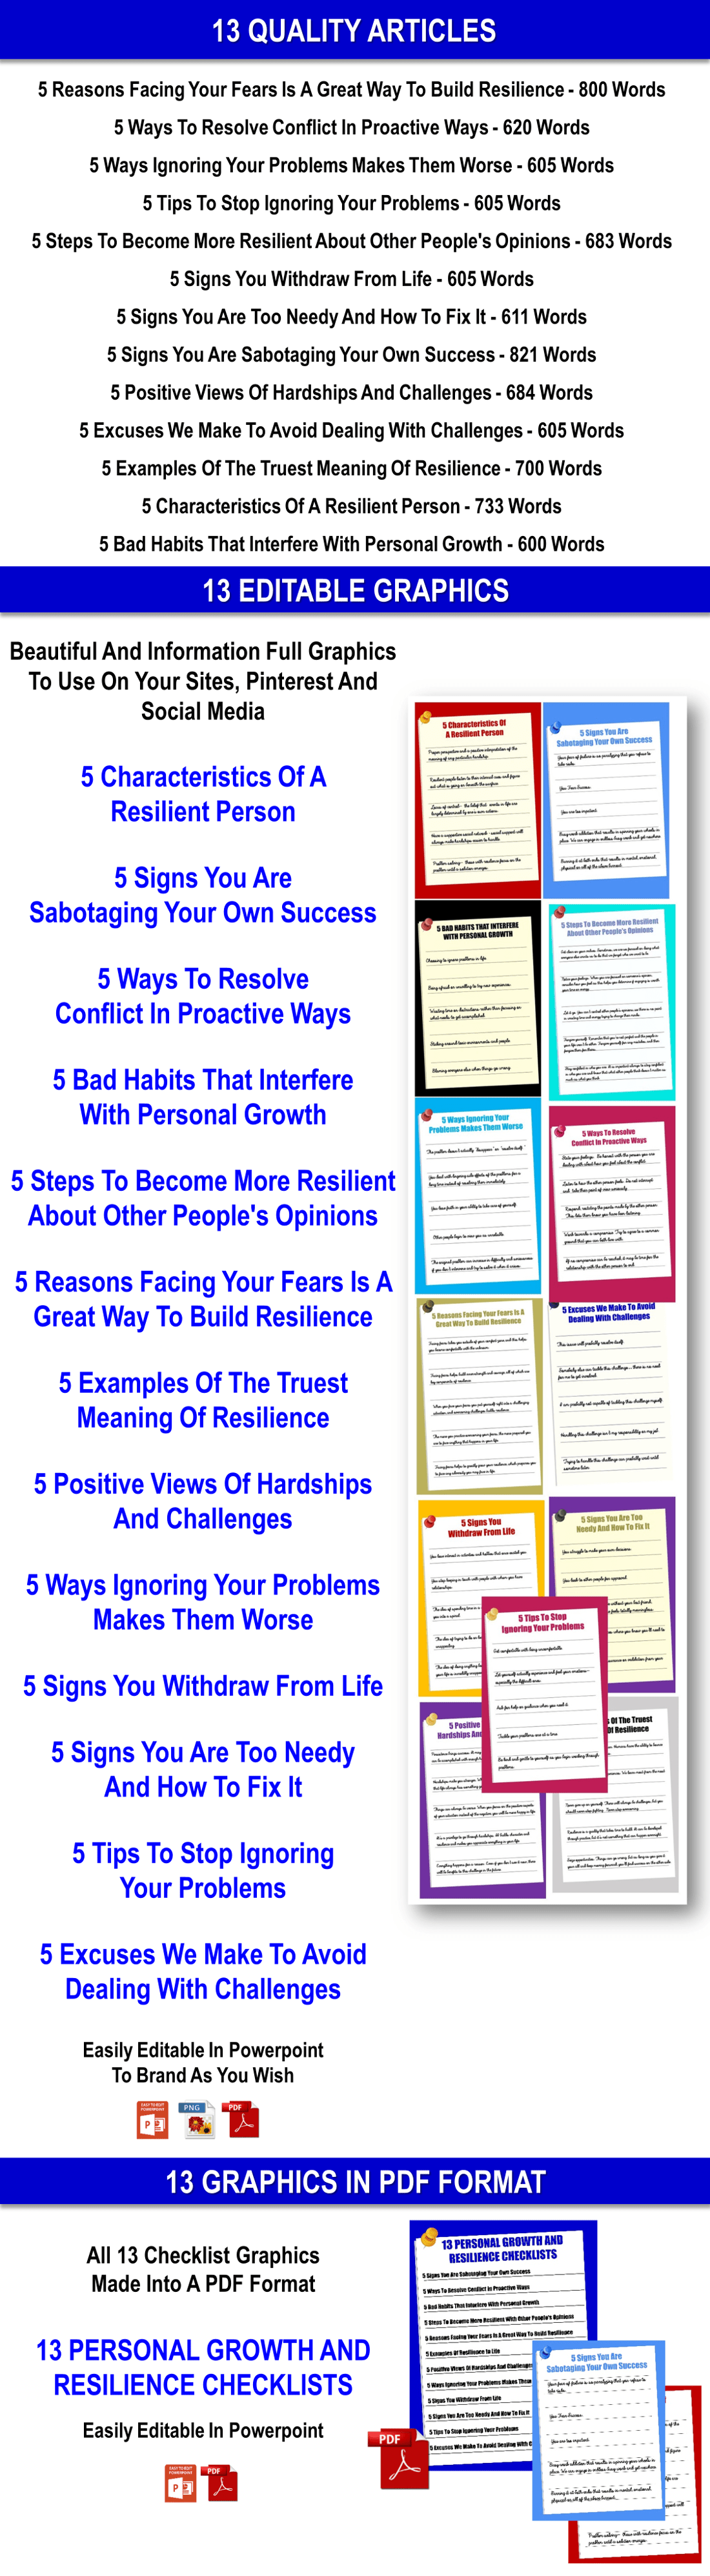 3 Personal Growth/Resilience Articles + 13 Editable Checklist Graphics